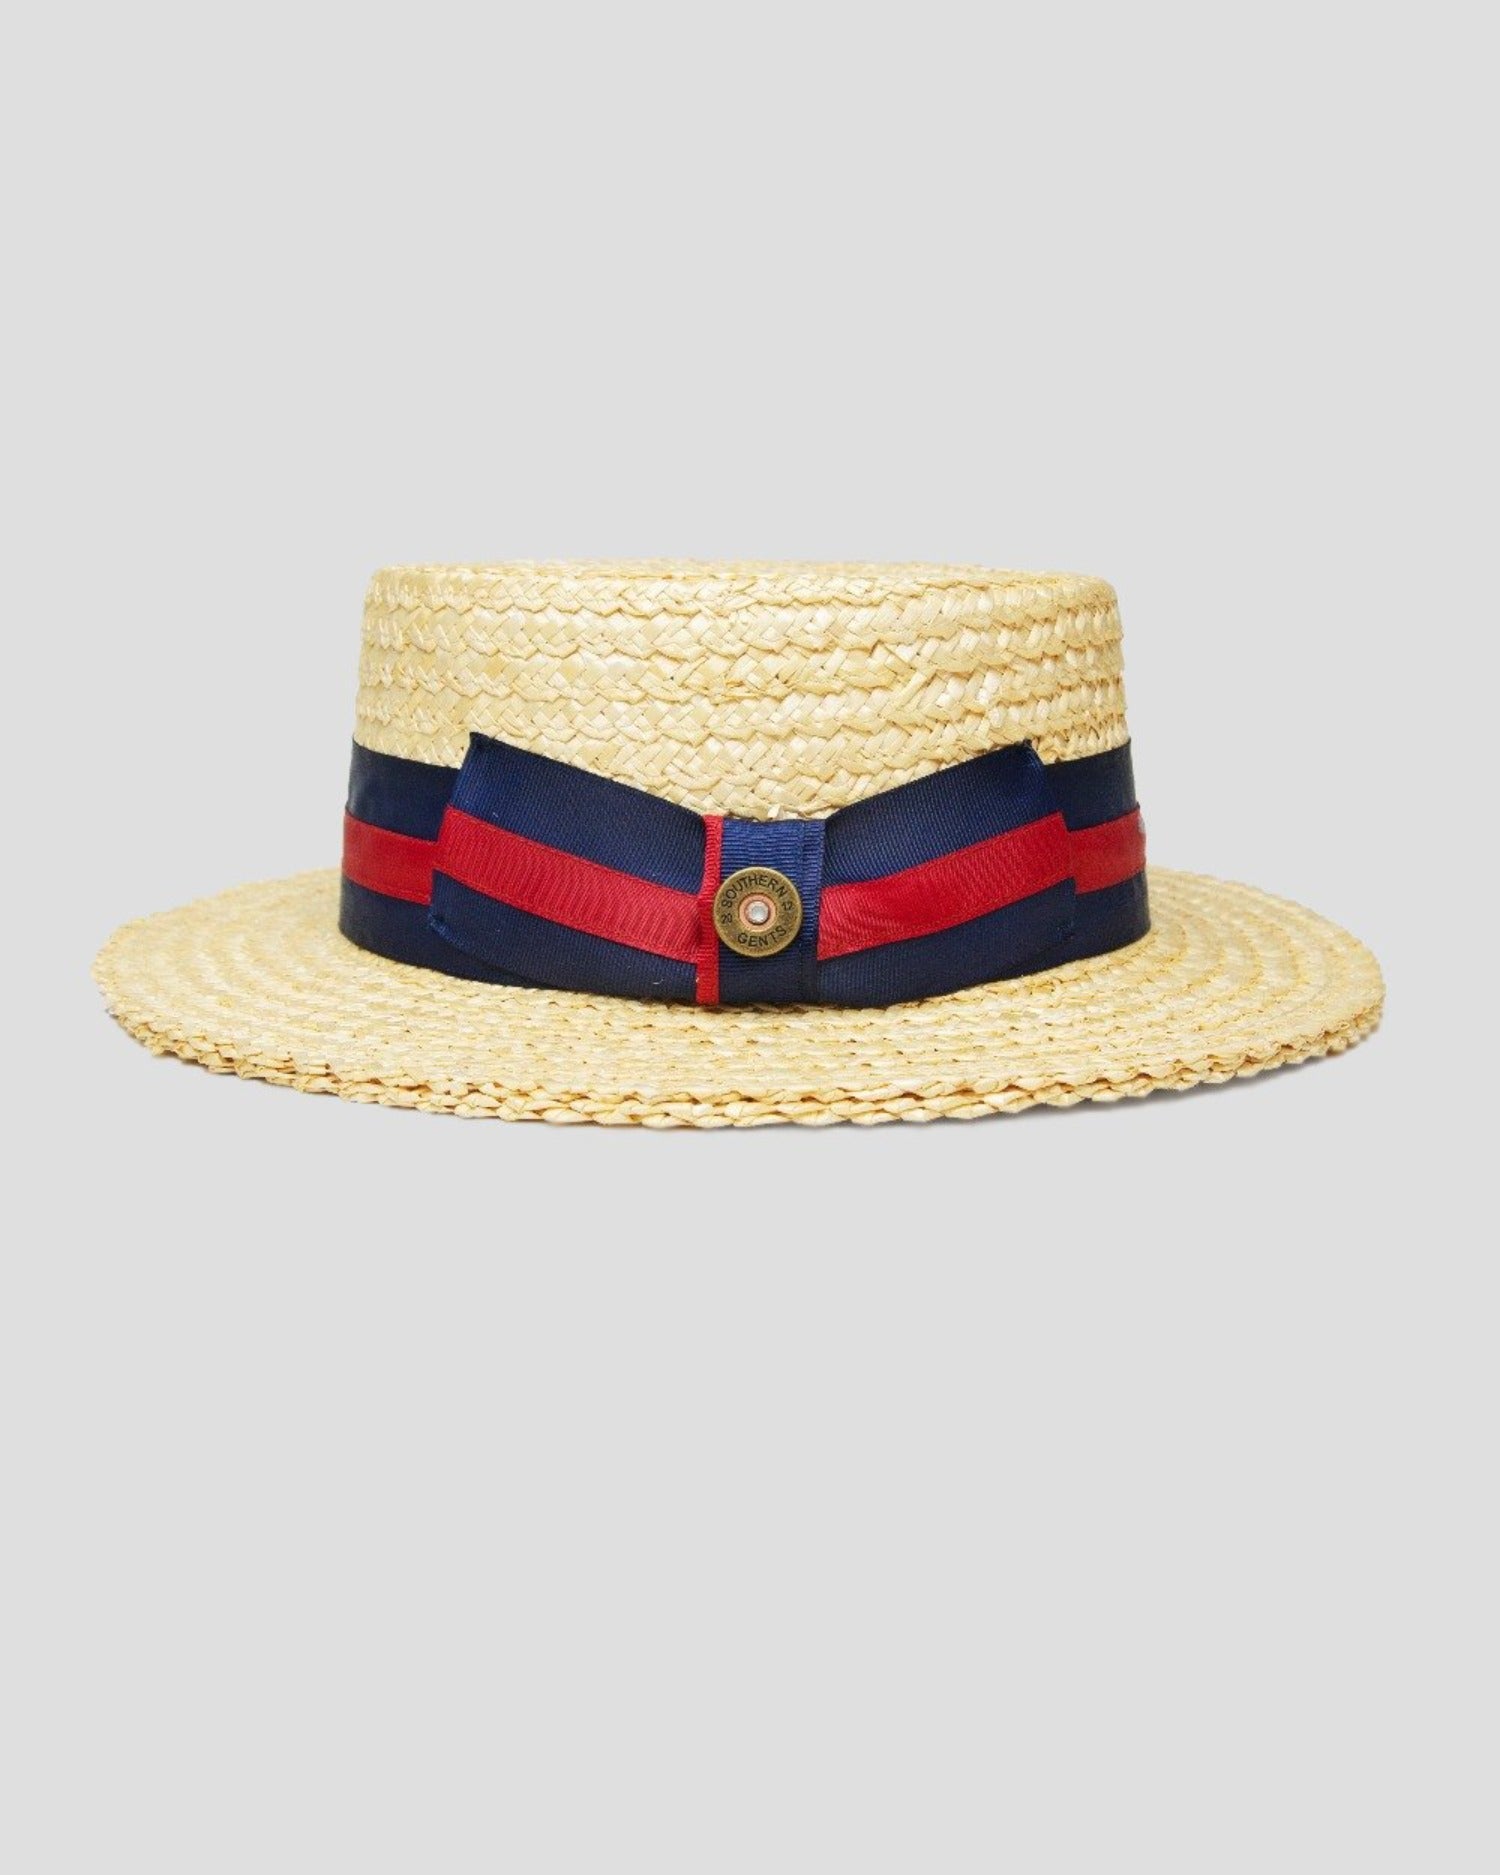 SG Boater Straw Hat – Tan